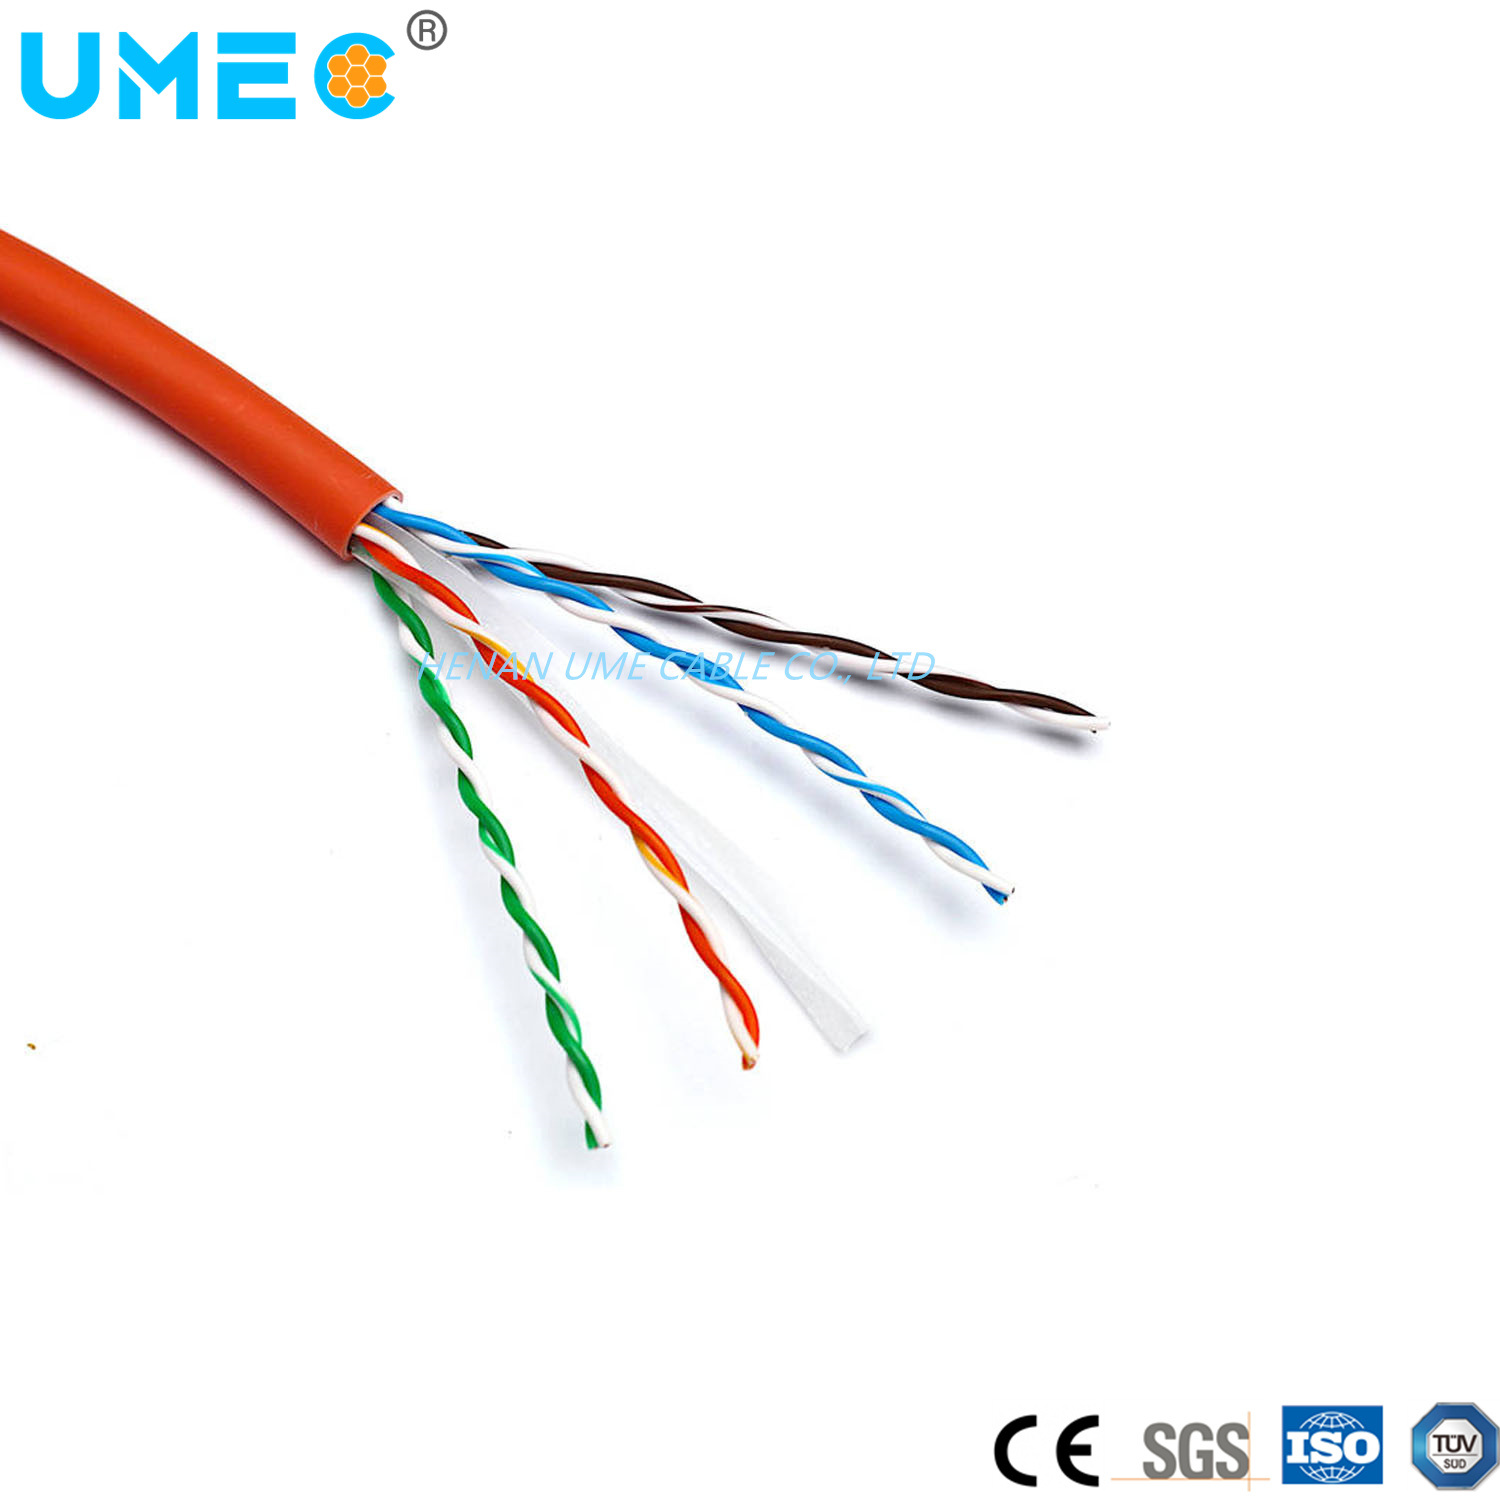 Customized Logo 3FT 6FT 20FT 100FT Length LAN Cable RJ45 Cat 6 Shielded Unshielded Patch Cord Cable Network Cable CAT6